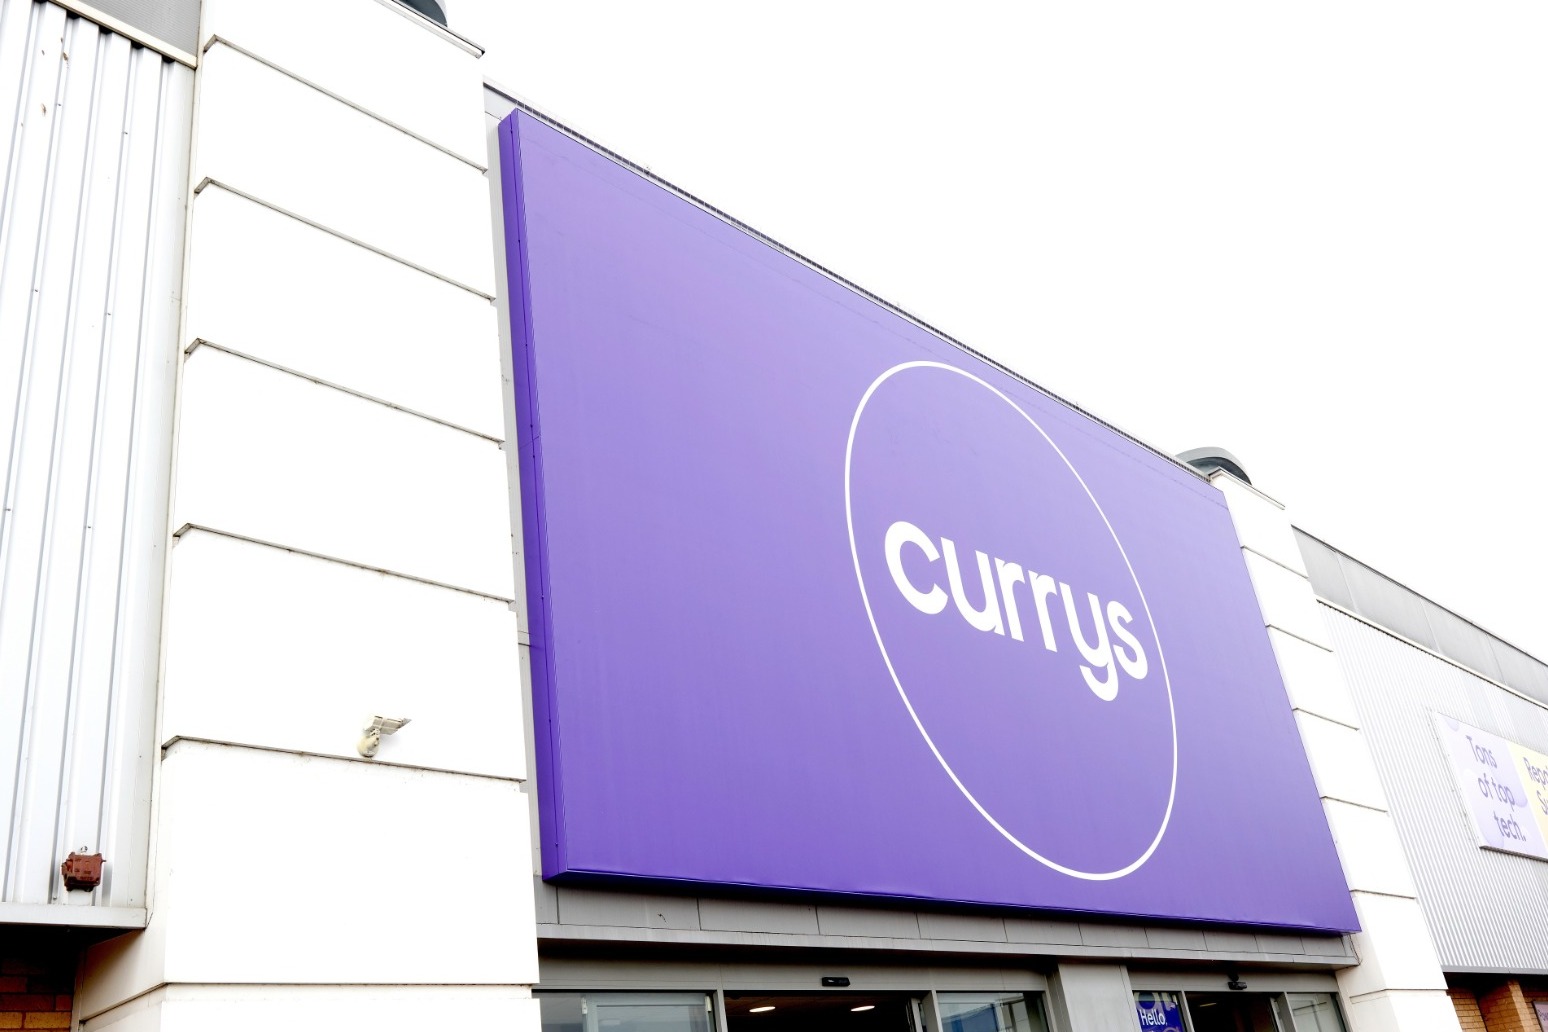 Currys cuts profit outlook again on Nordic woes 